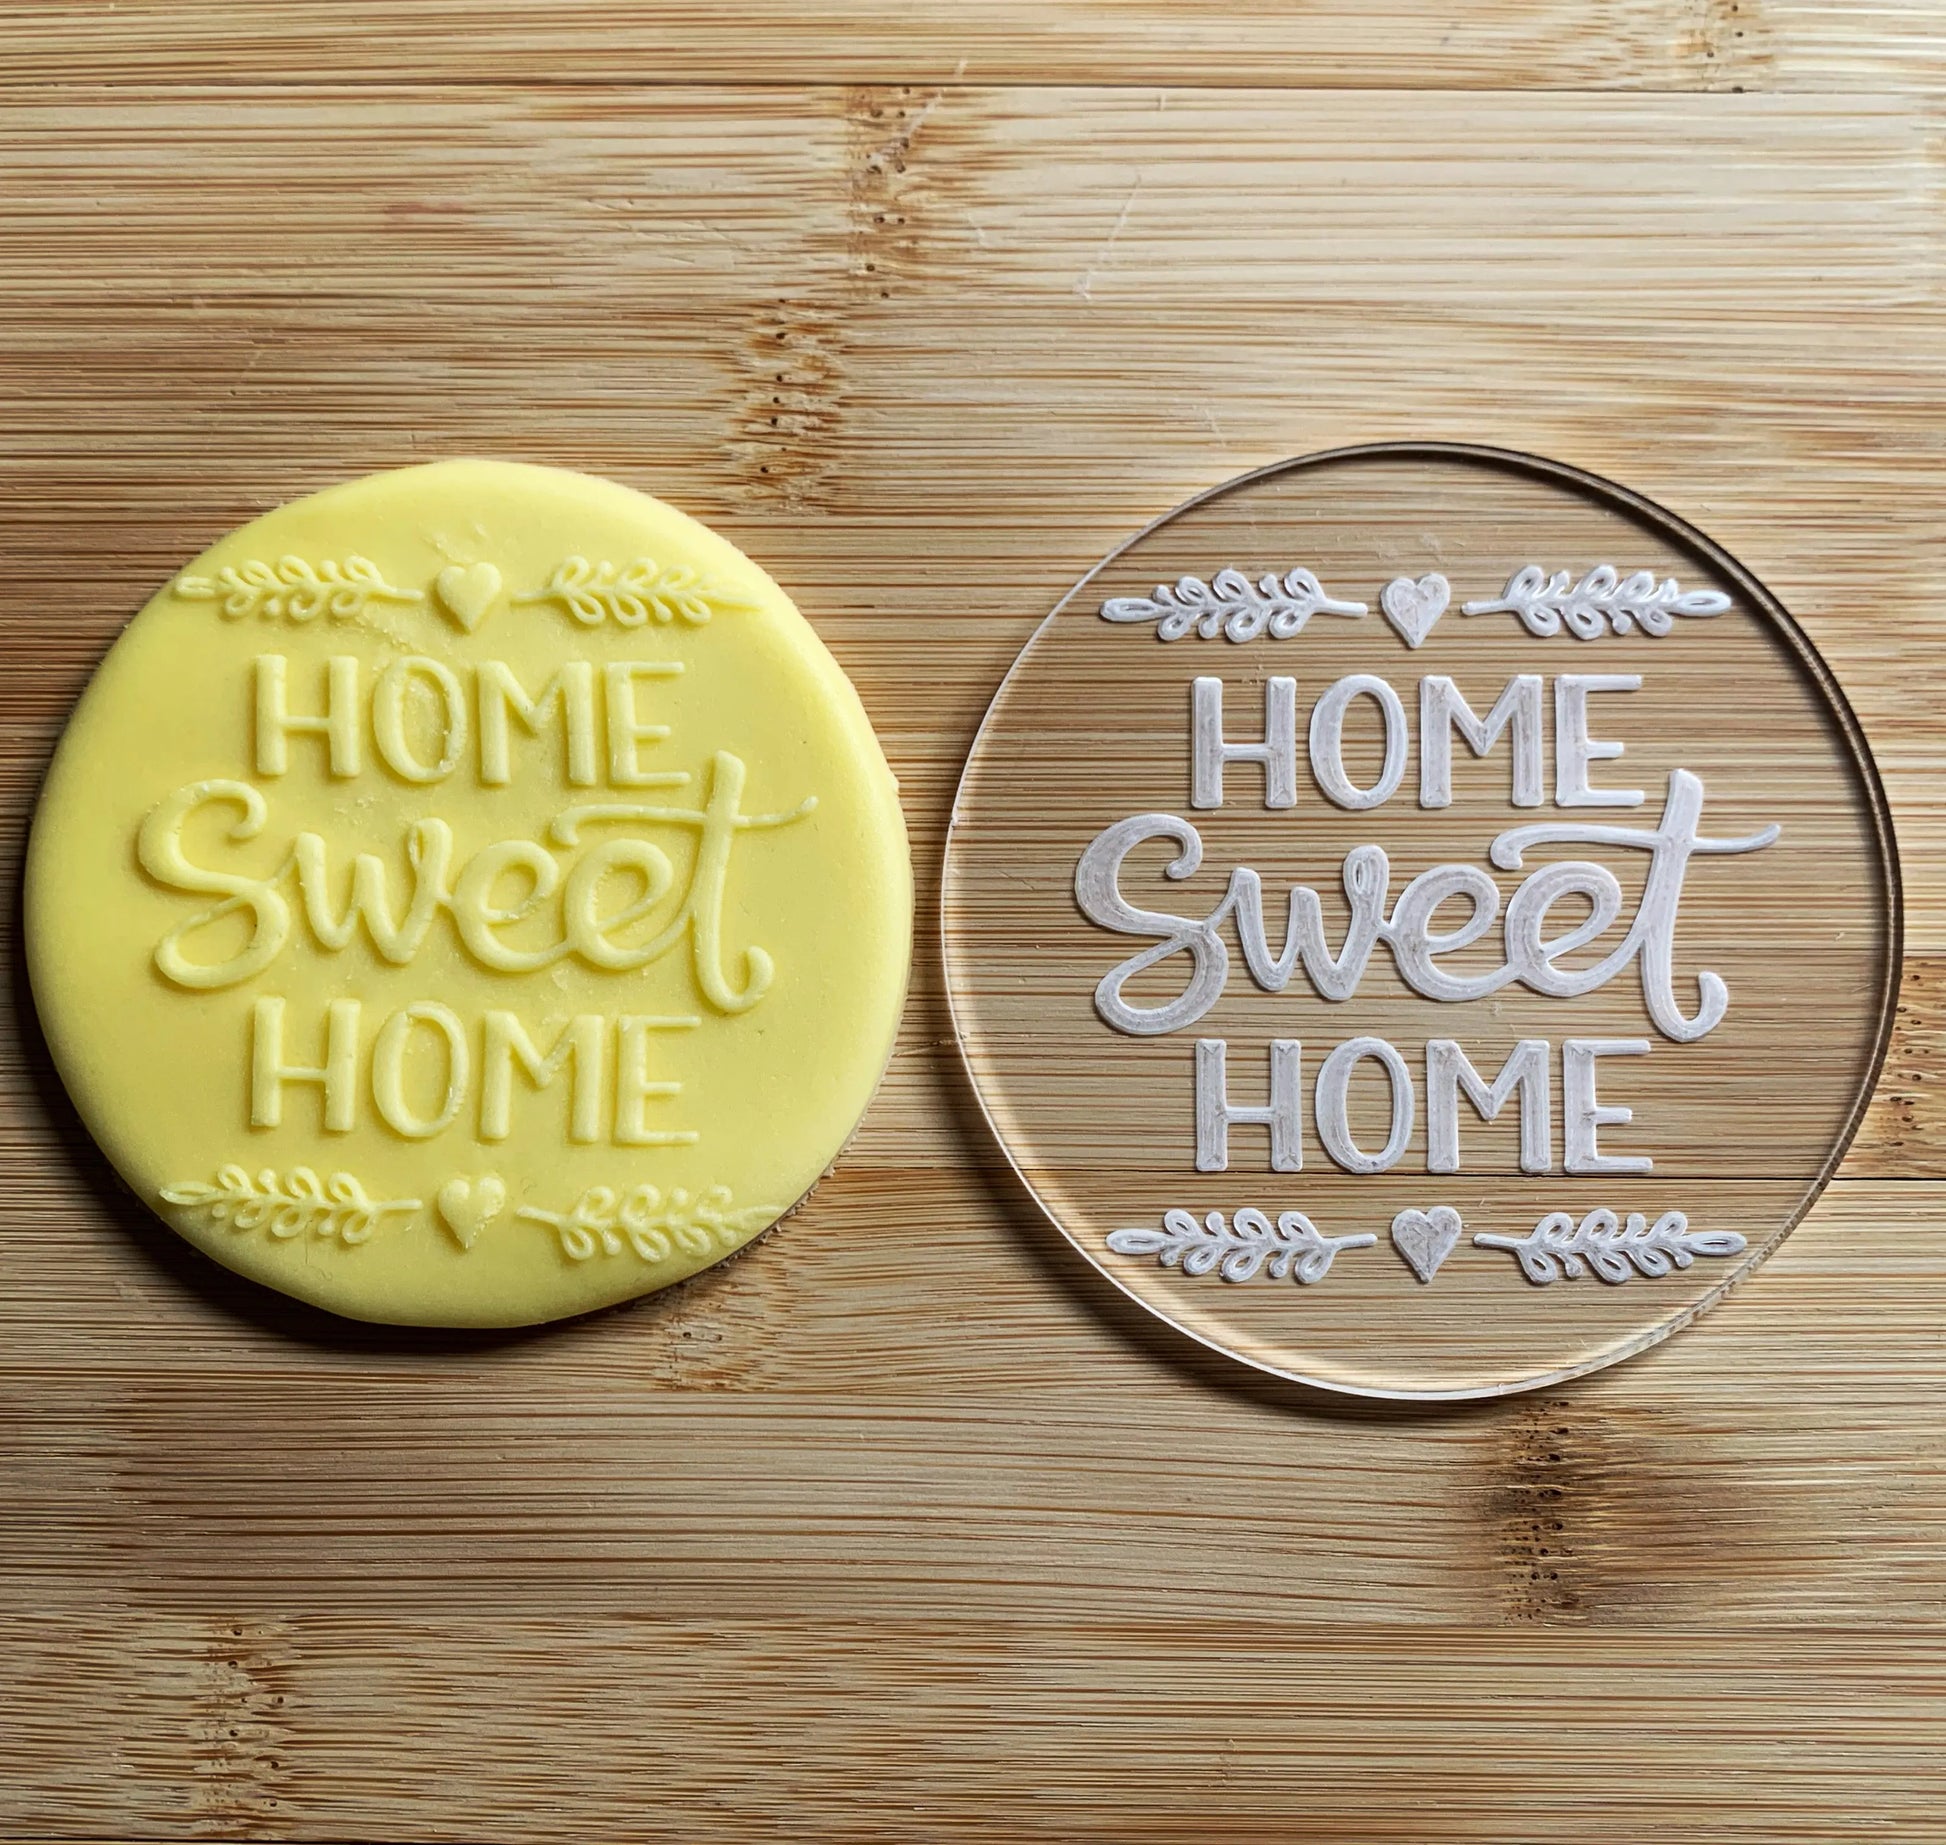 Home sweet home - debossing acrylic stamp MEG cookie cutters